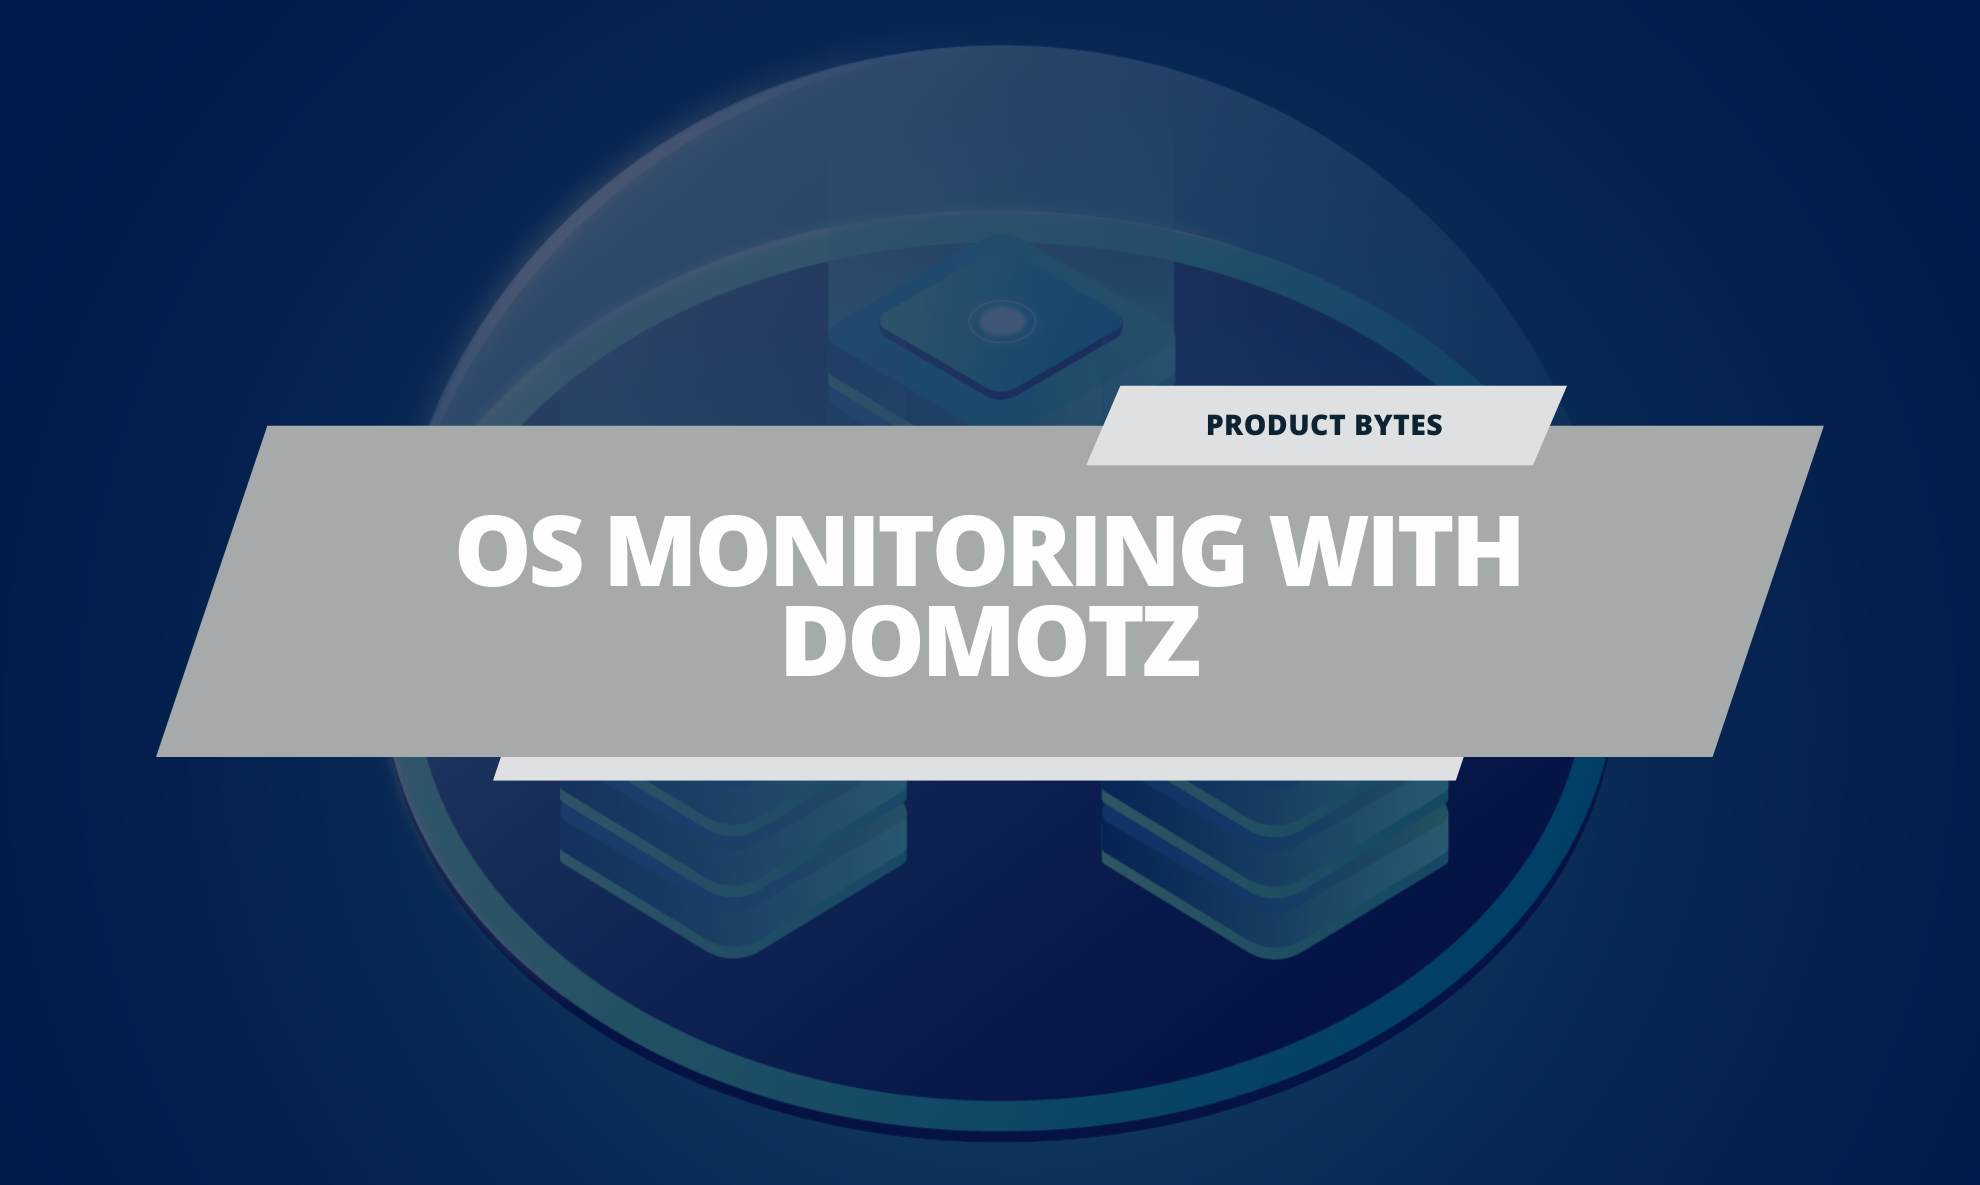 How to do OS Monitoring with Domotz